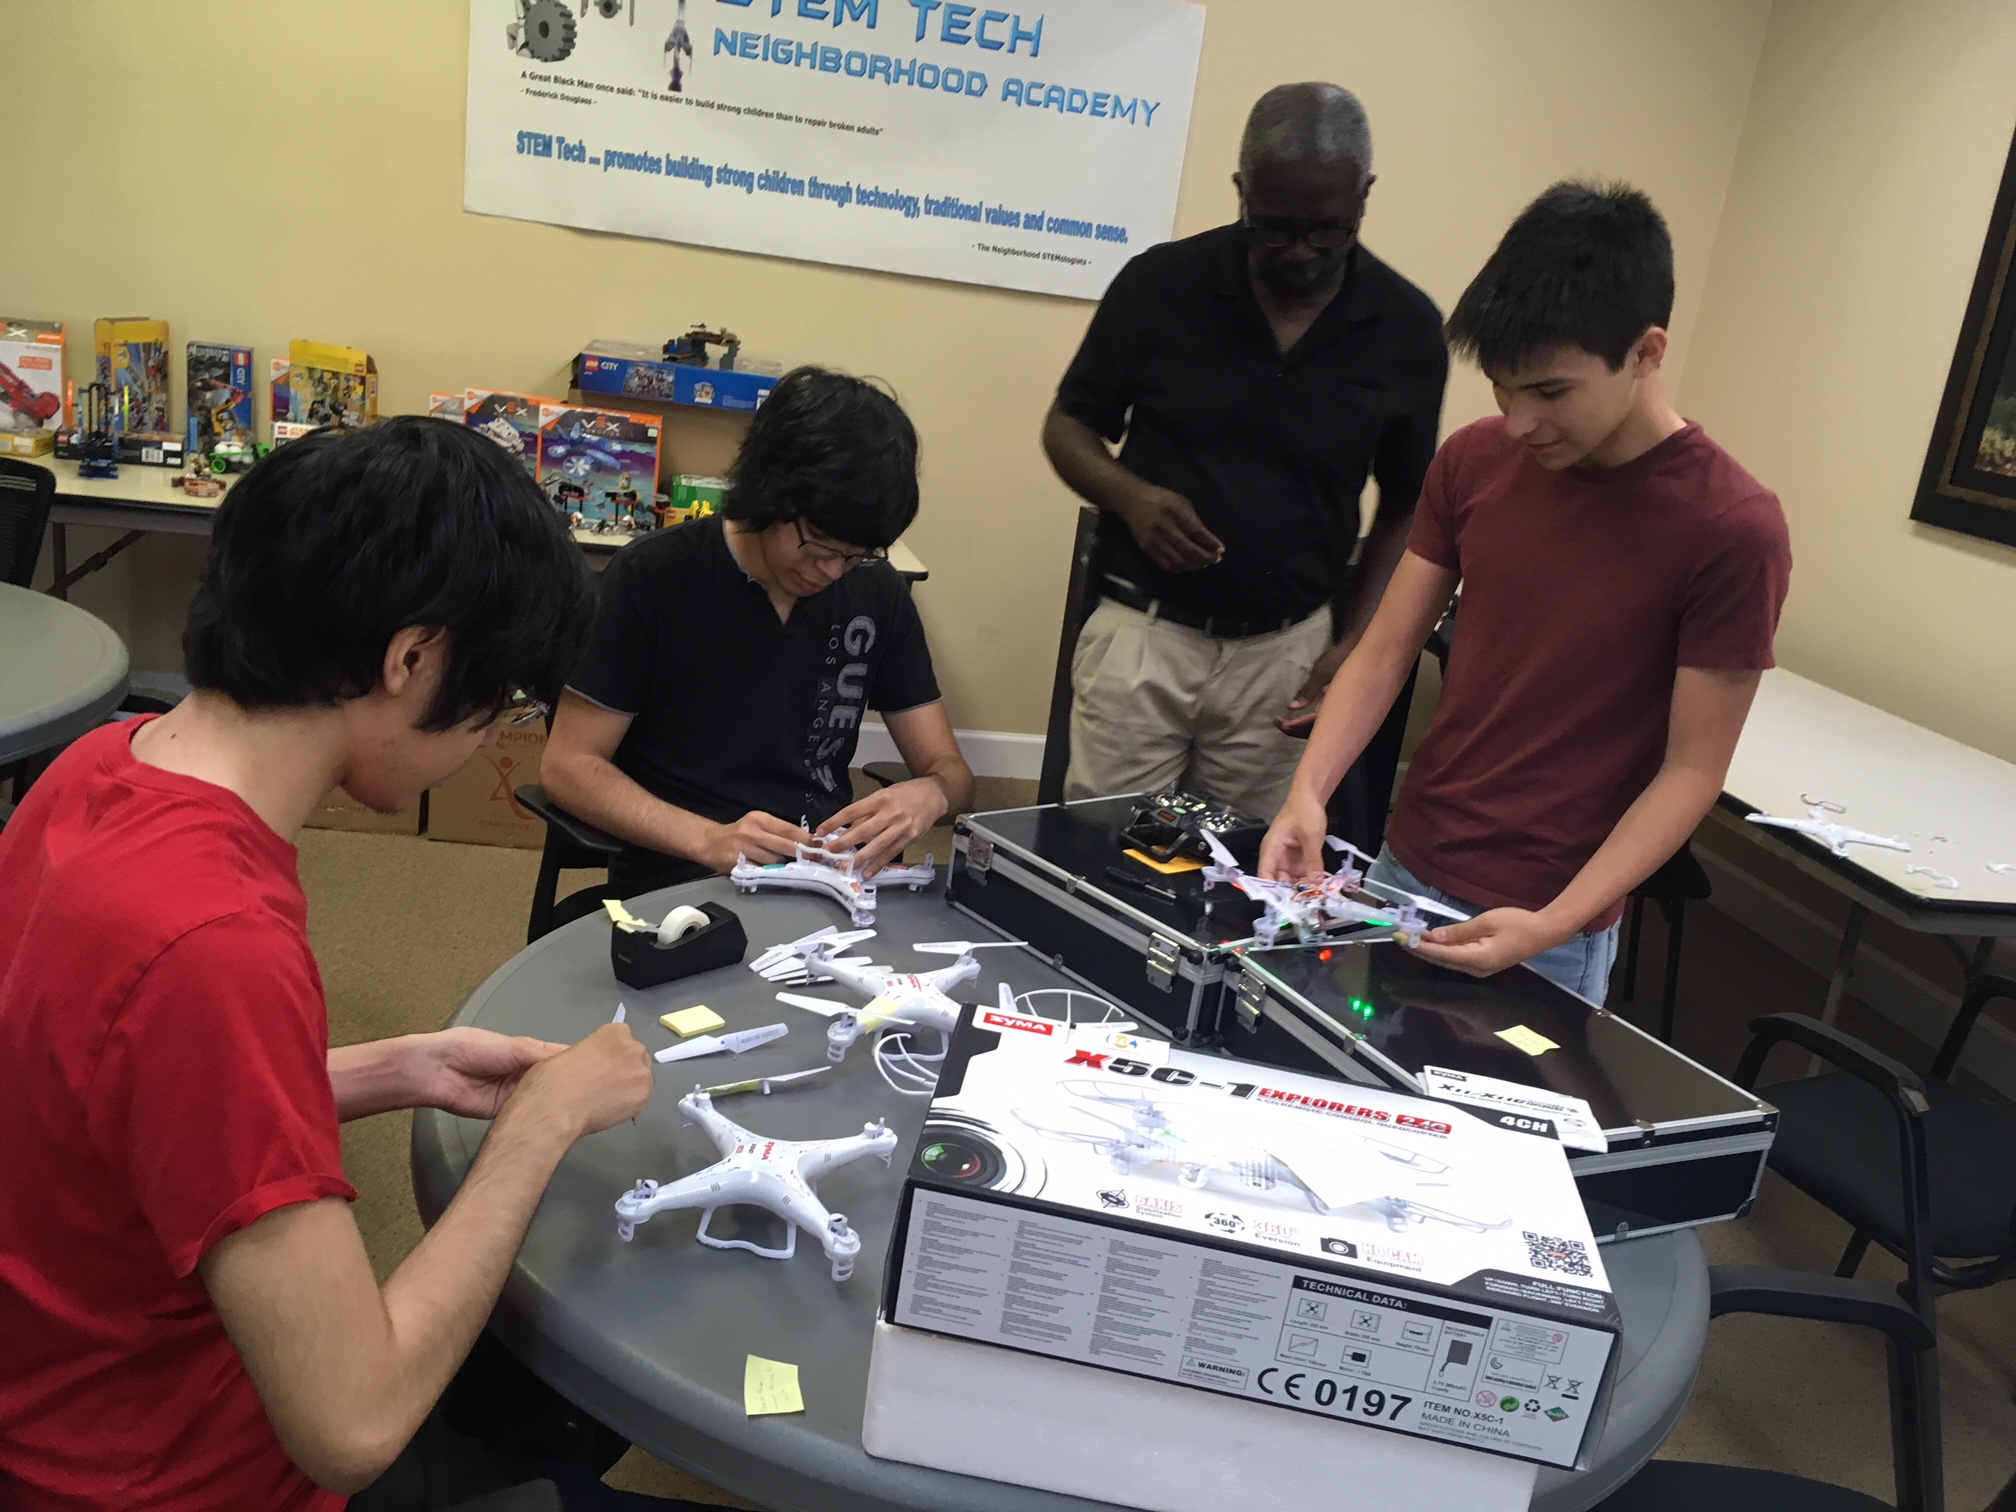 Students working on drone projects and learning together